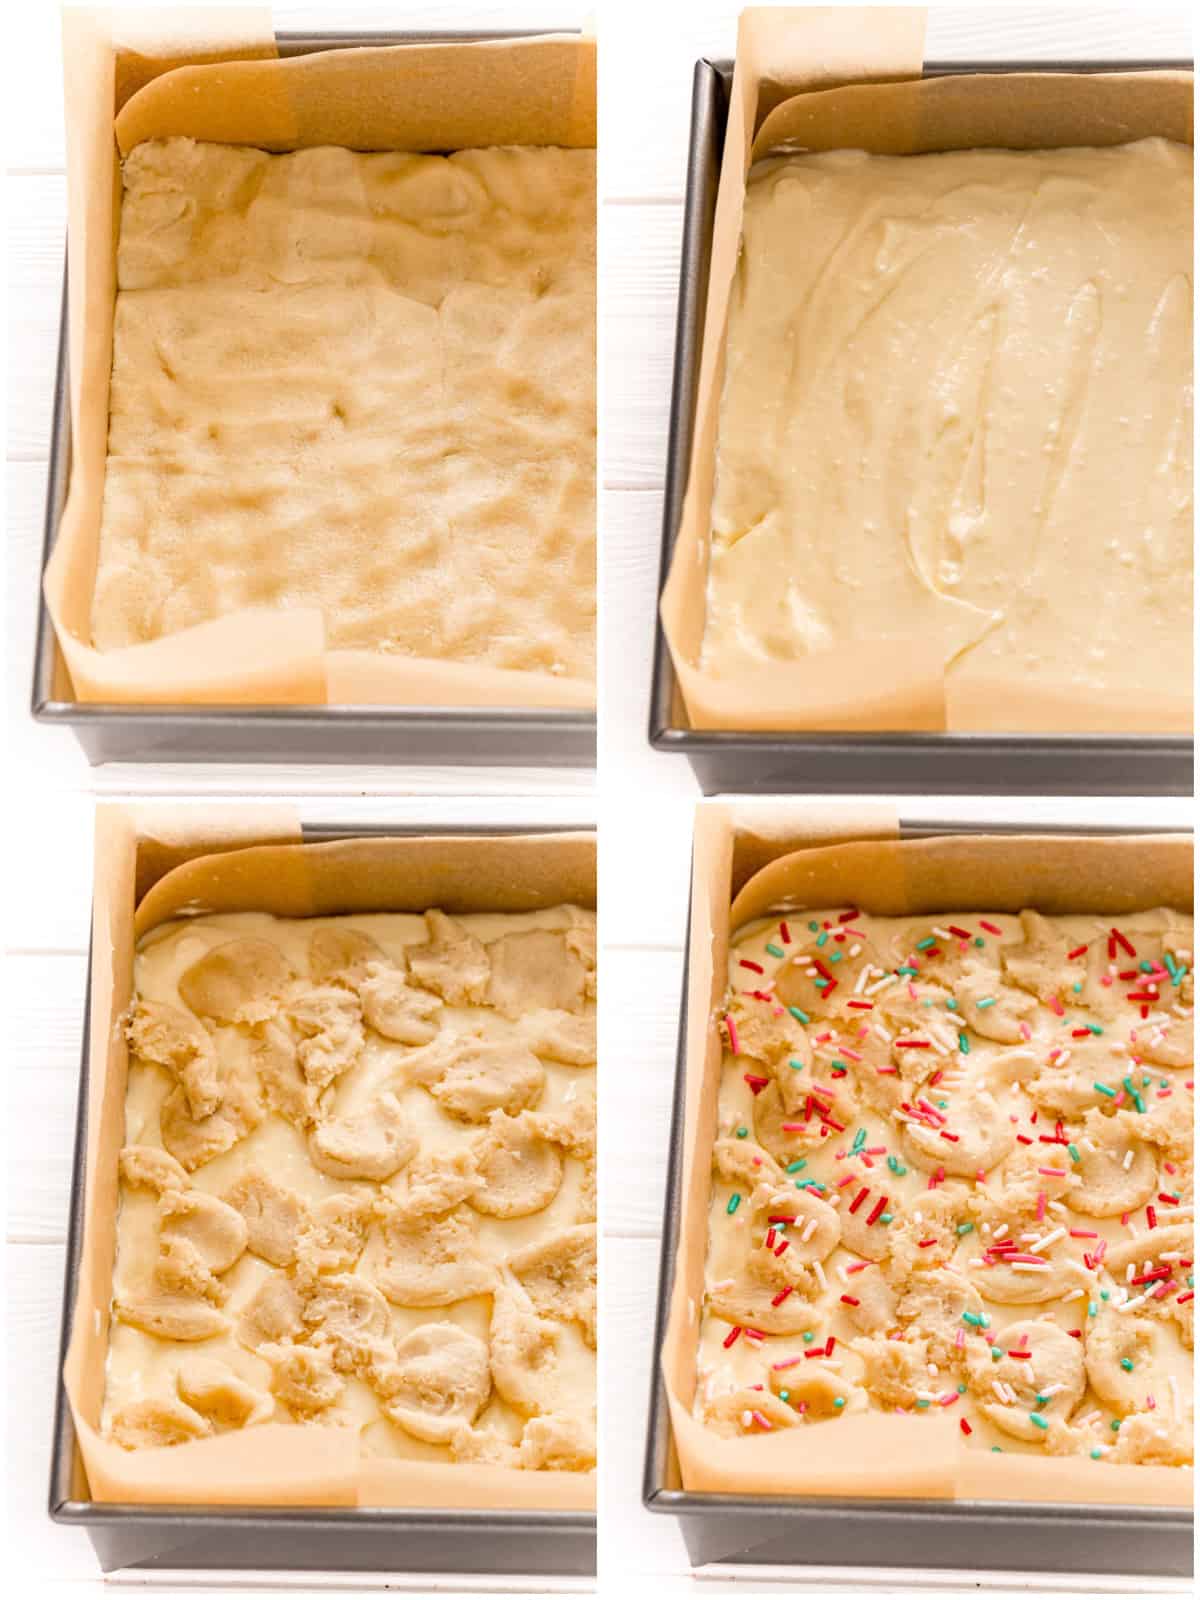 Step by step photos on how to make Cheesecake Bars